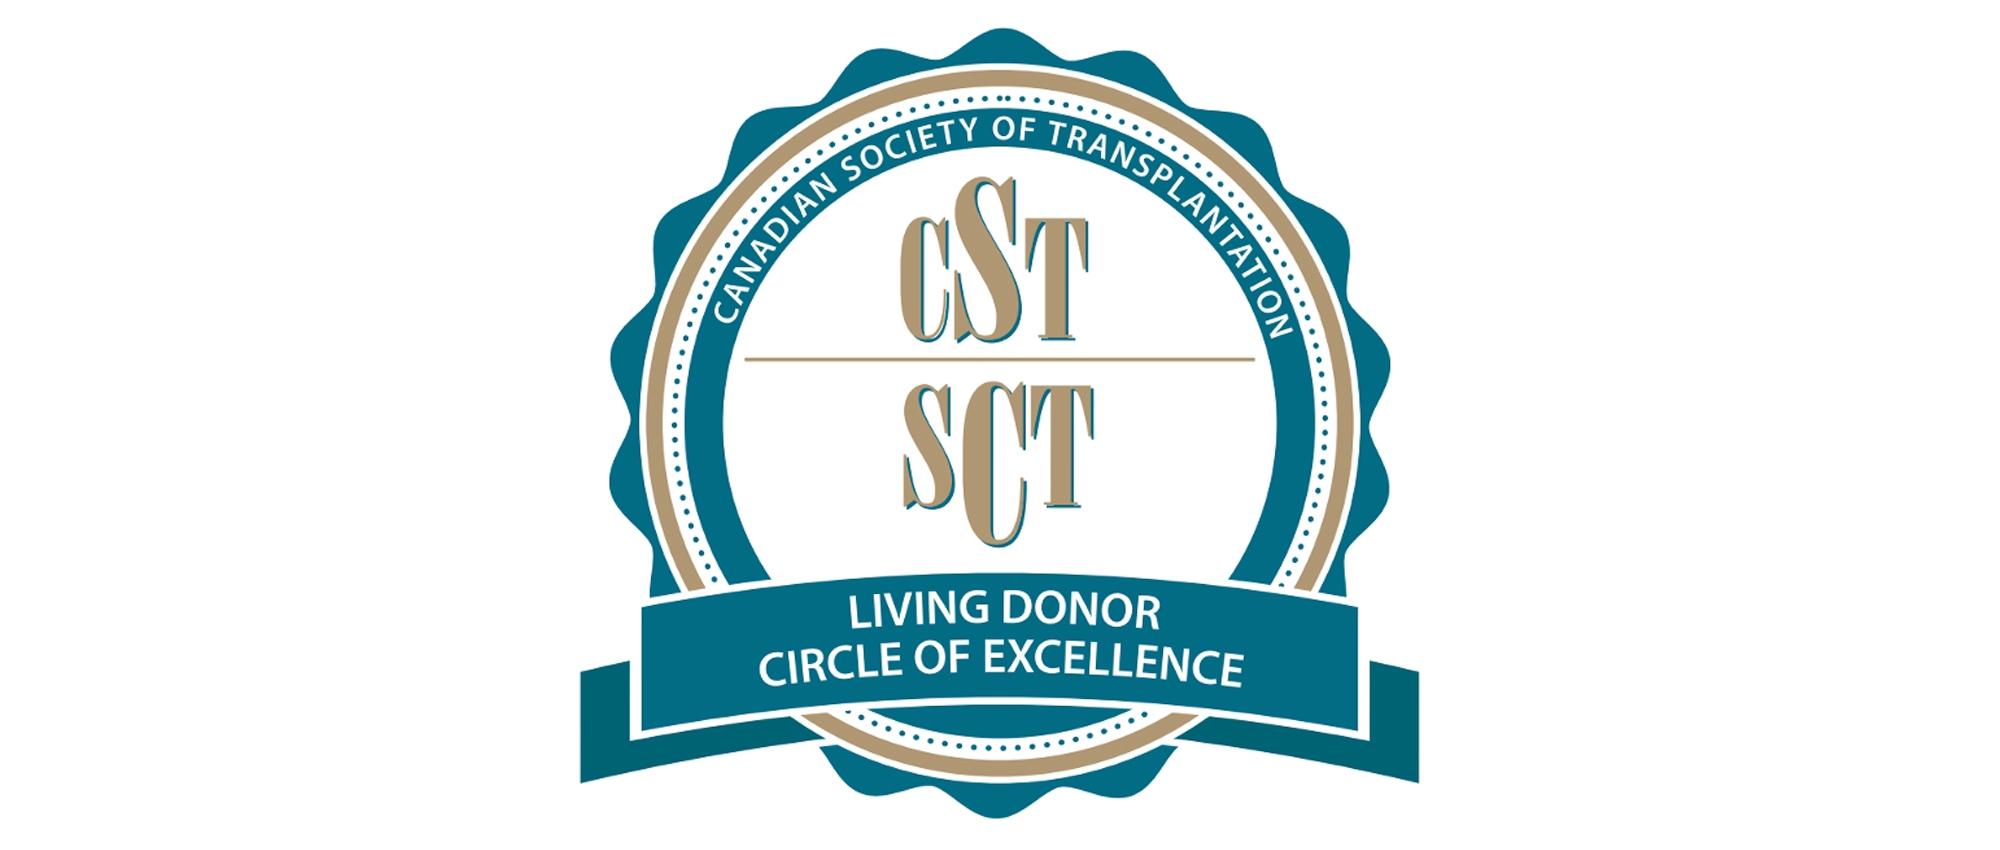 Logo for the Canadian Society of Transplantation’s Circle of Excellence for employers who support employees to become living organ donors.